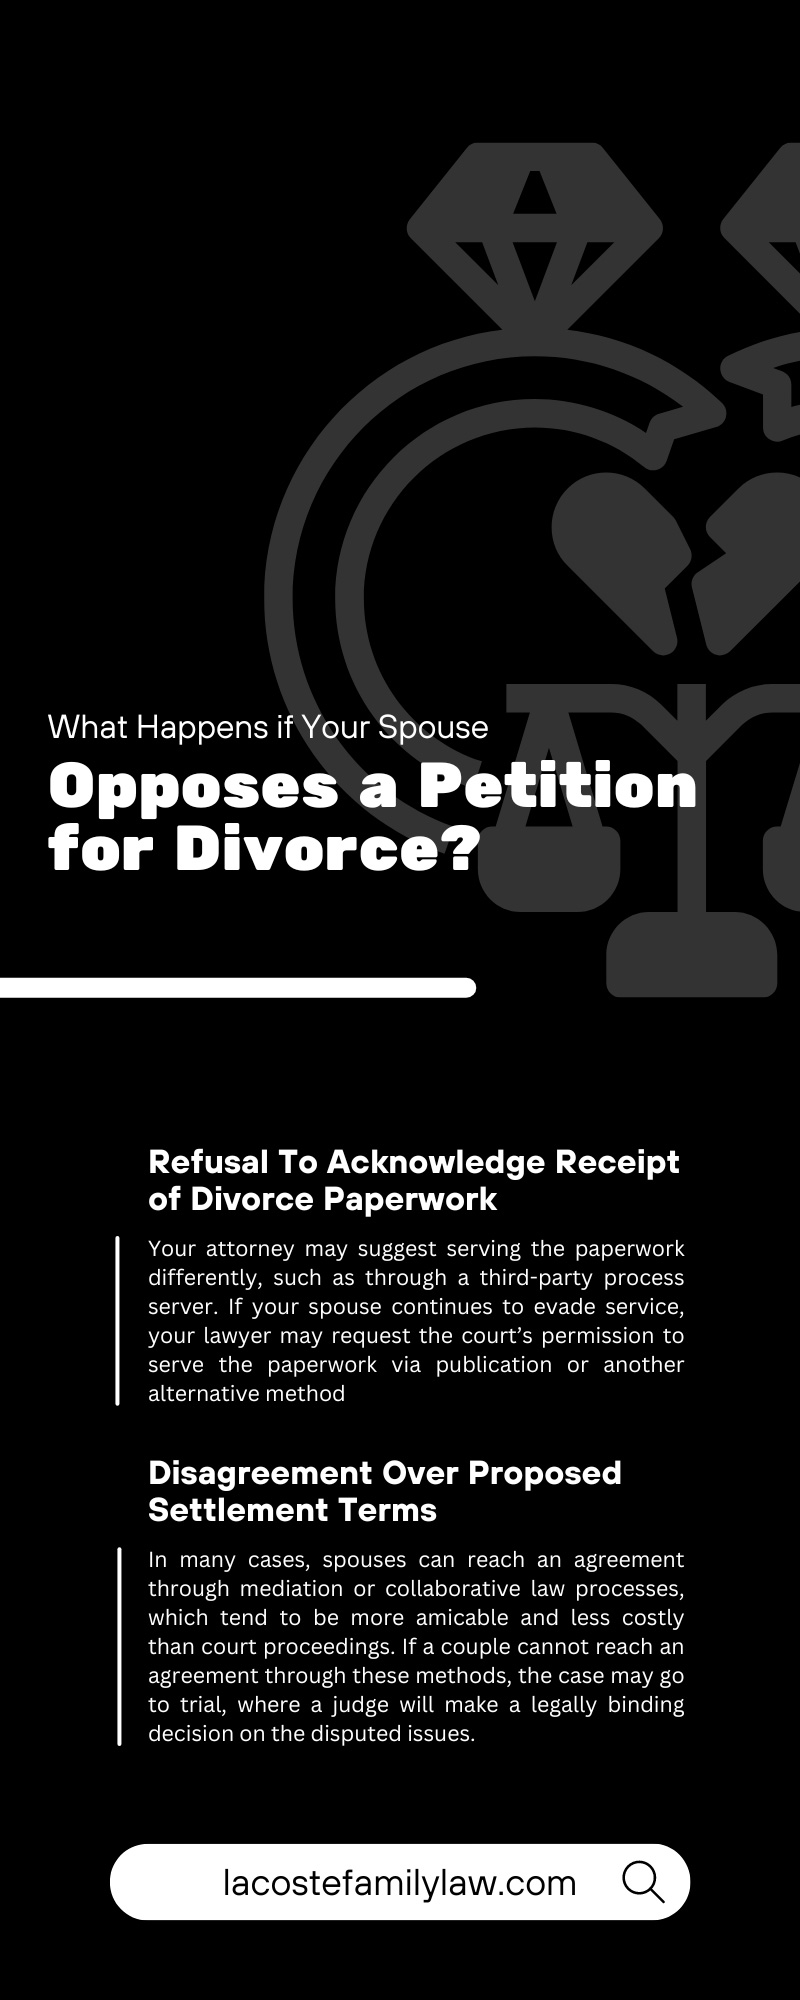 What Happens if Your Spouse Opposes a Petition for Divorce? 